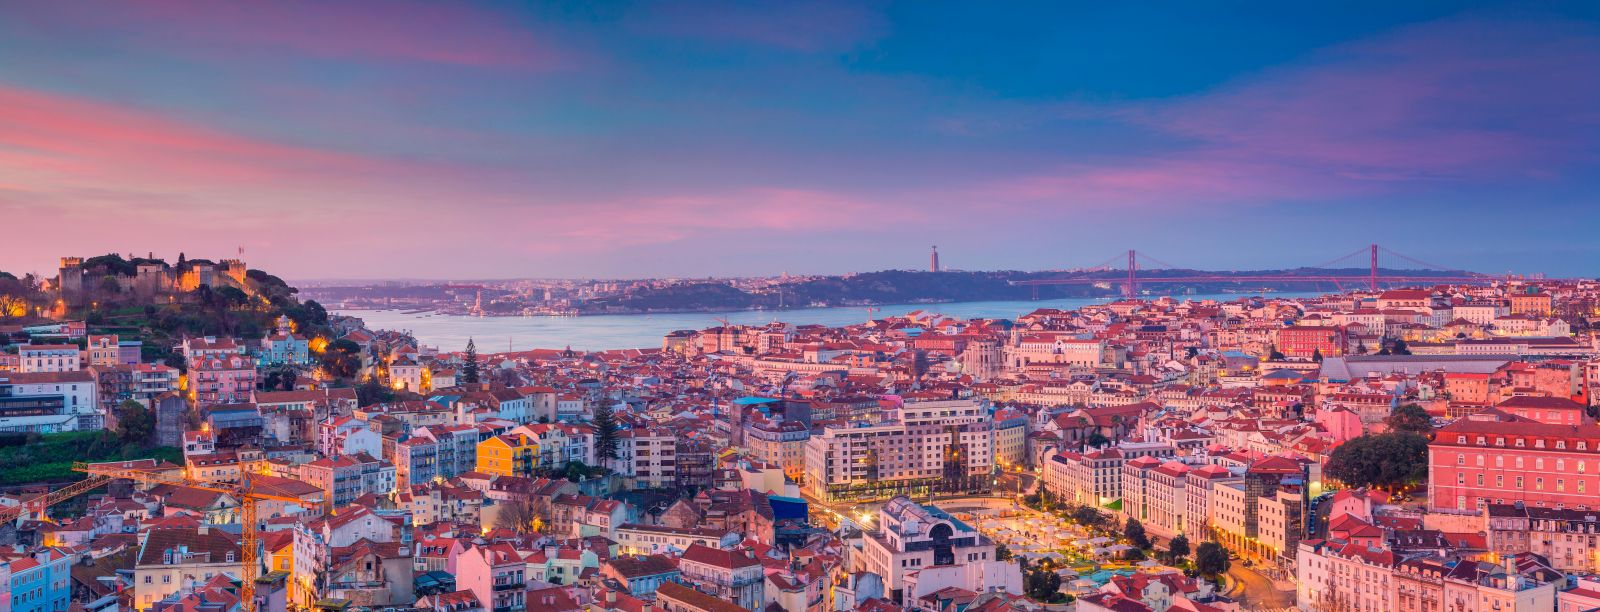 Lisbon has become one of the best places in Europe for real estate investments.